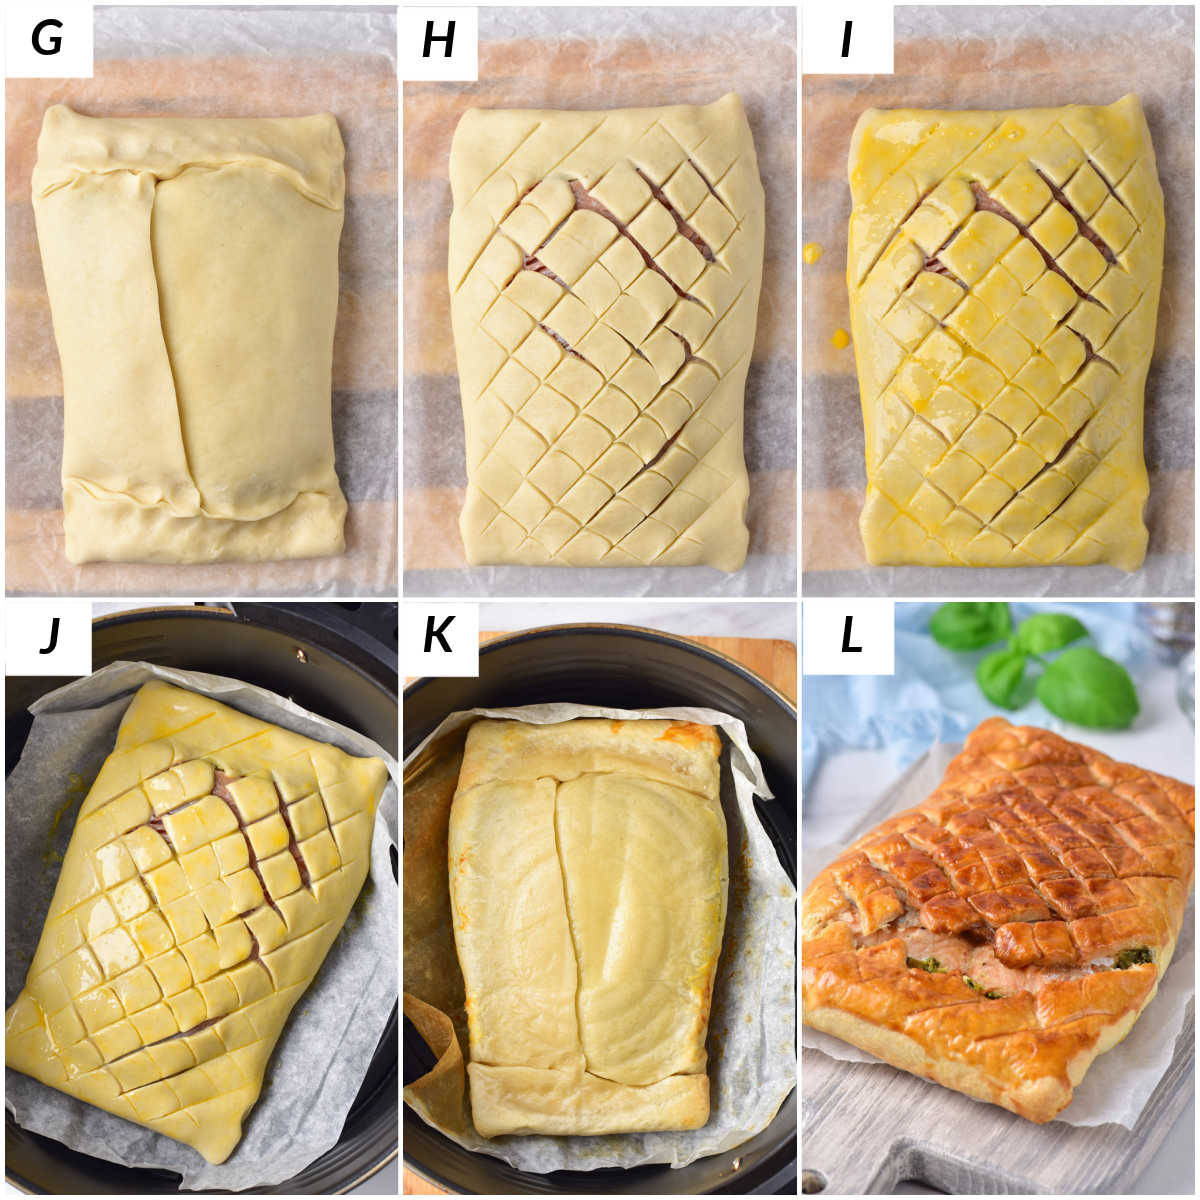 image collage showing the final steps for making salmon wellington